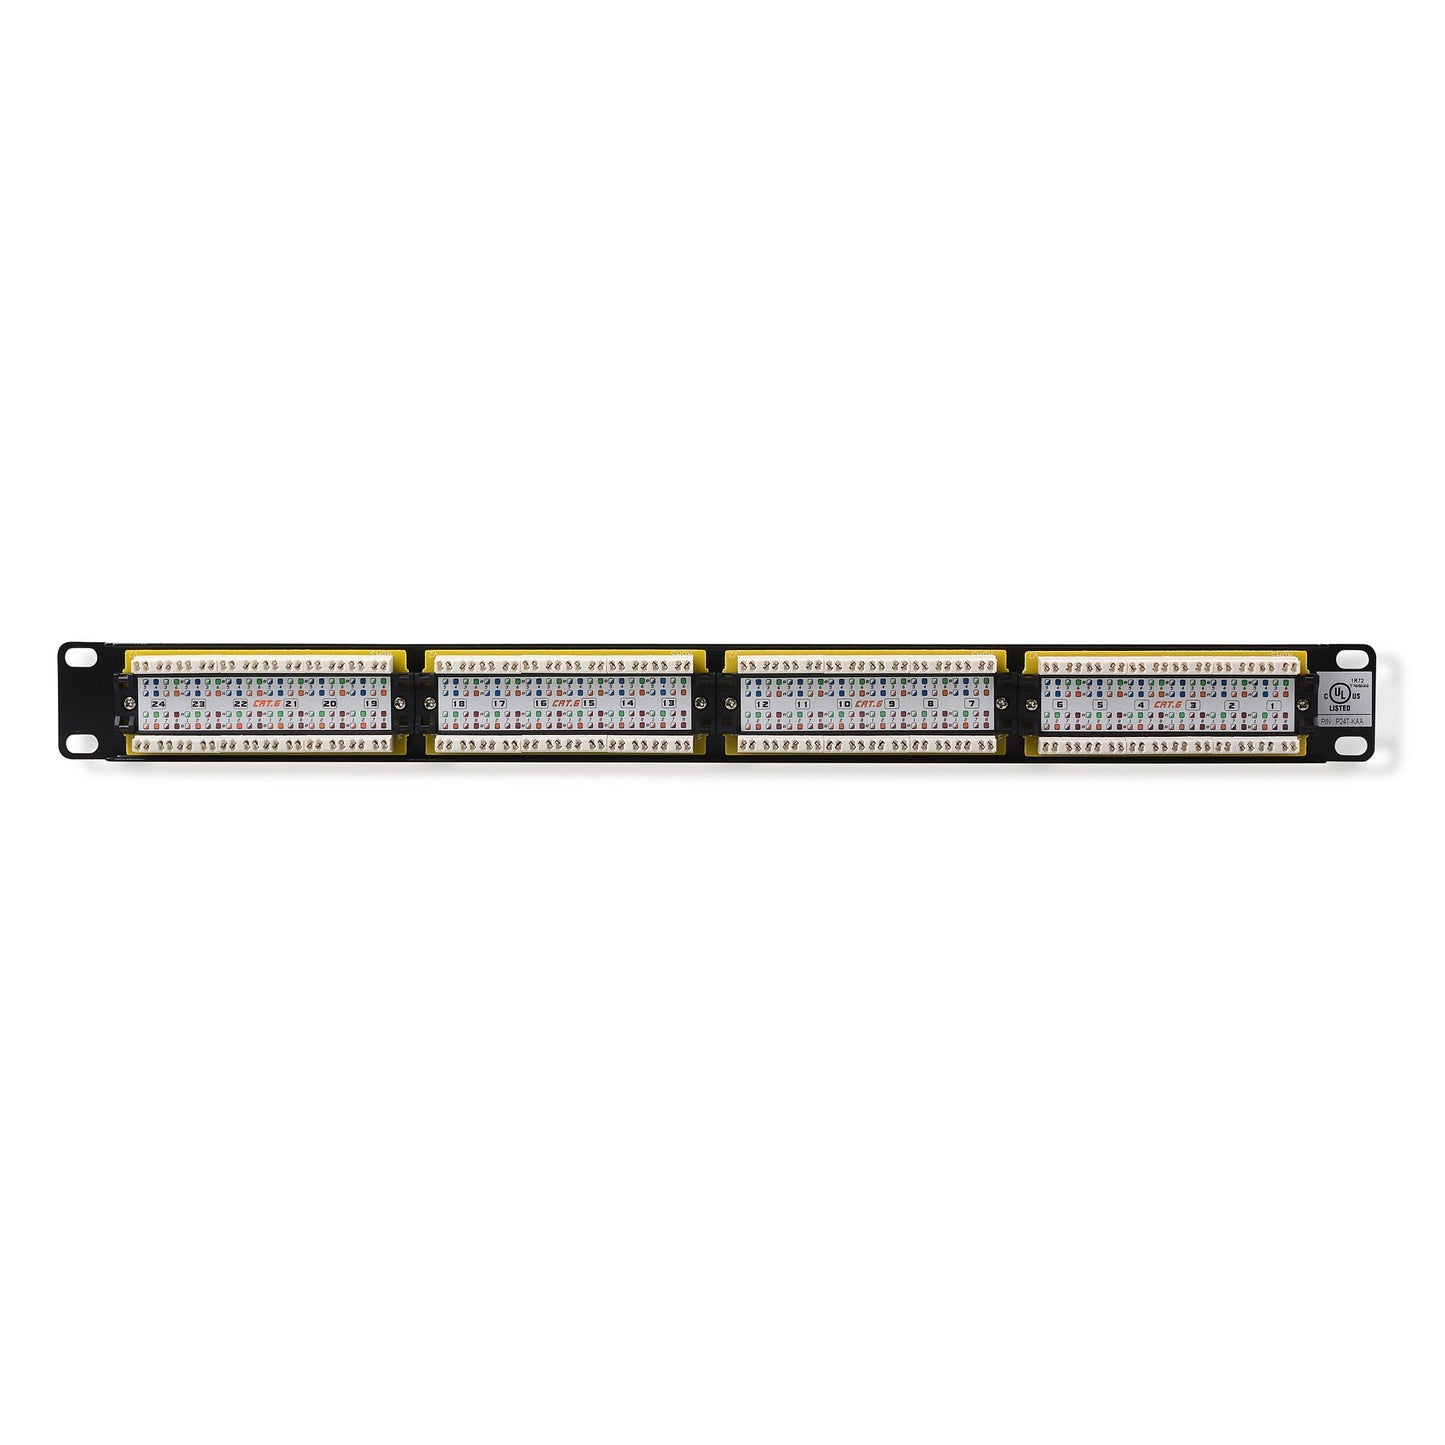 Cable Matters UL Listed Rackmount or Wall Mount 24 Port Network Patch Panel (Cat6 Patch Panel / RJ45 Patch Panel)